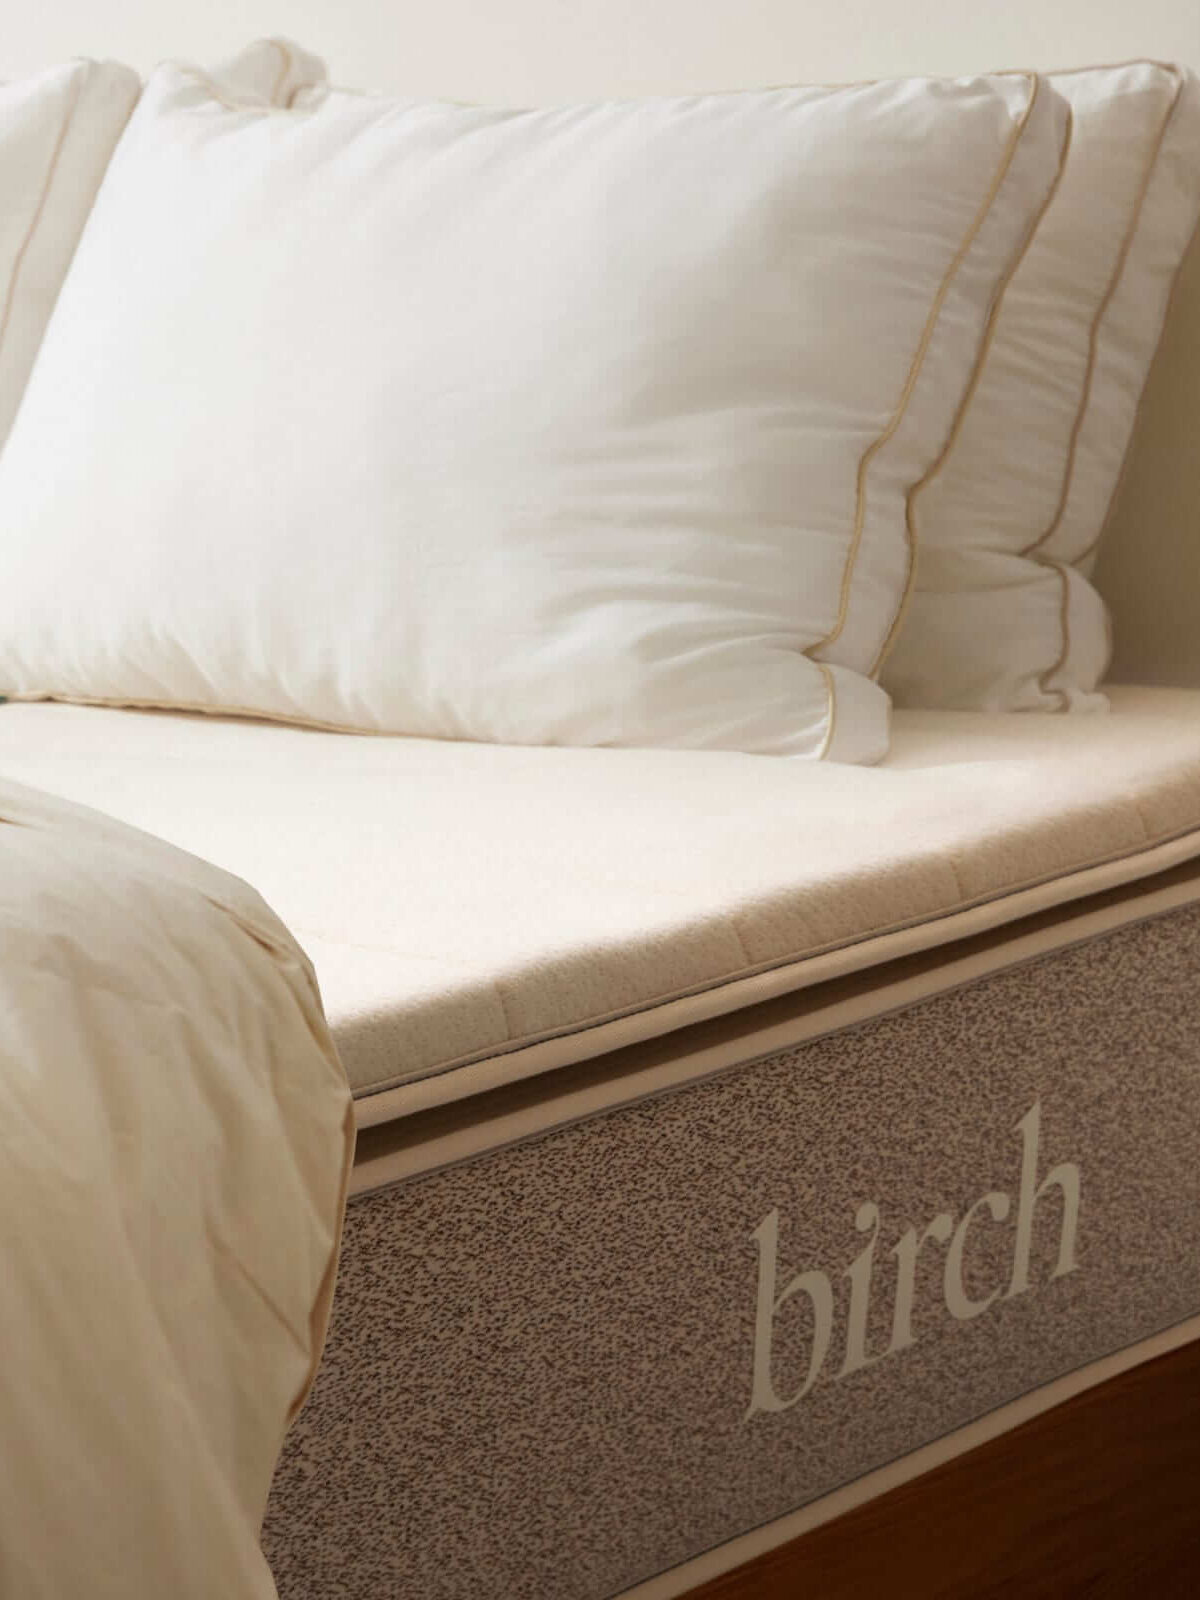 The Birch organic mattress topper and pillows on an unmade bed.